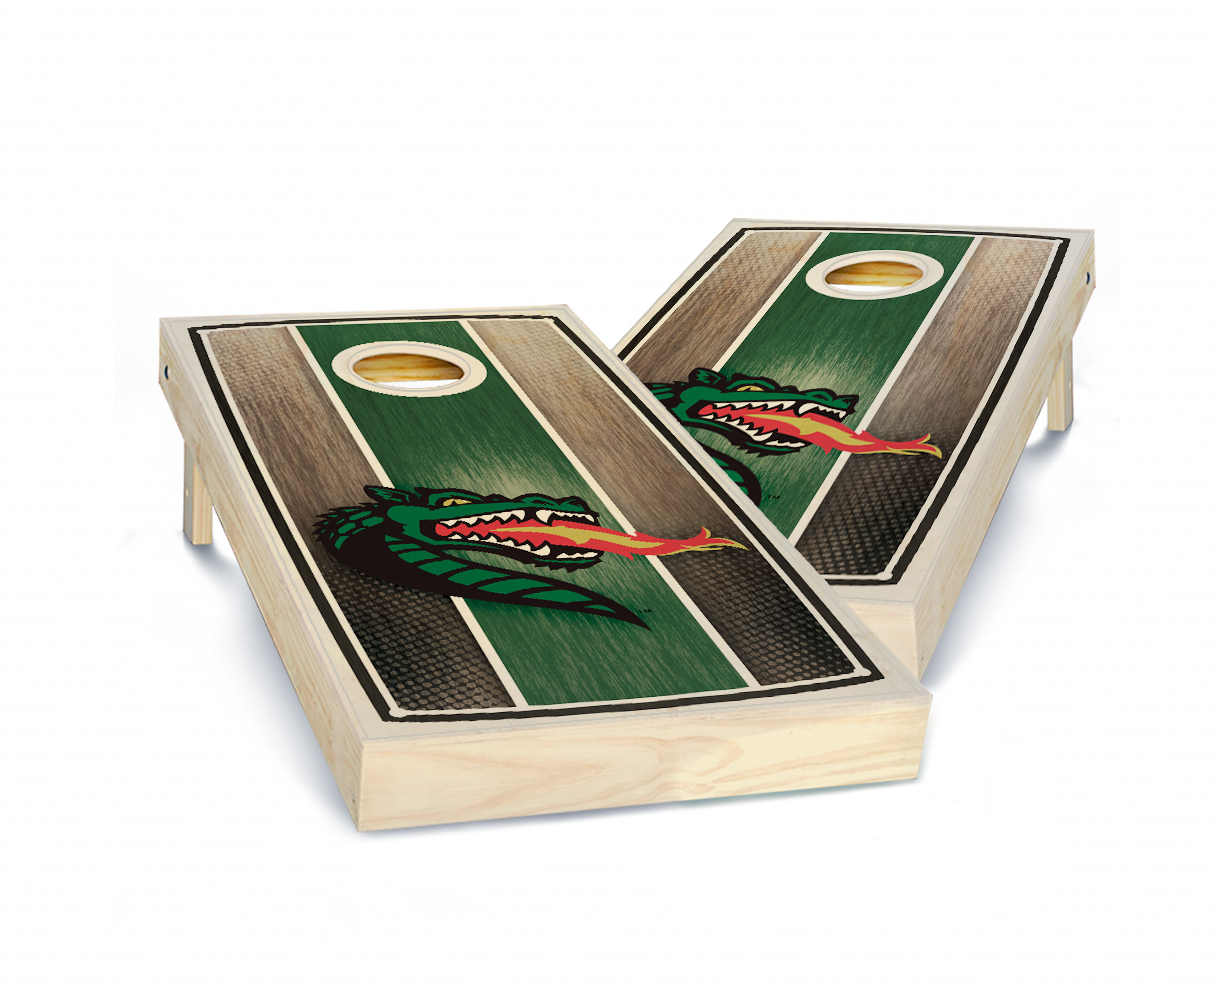 "UAB Stained Stripe" Cornhole Boards